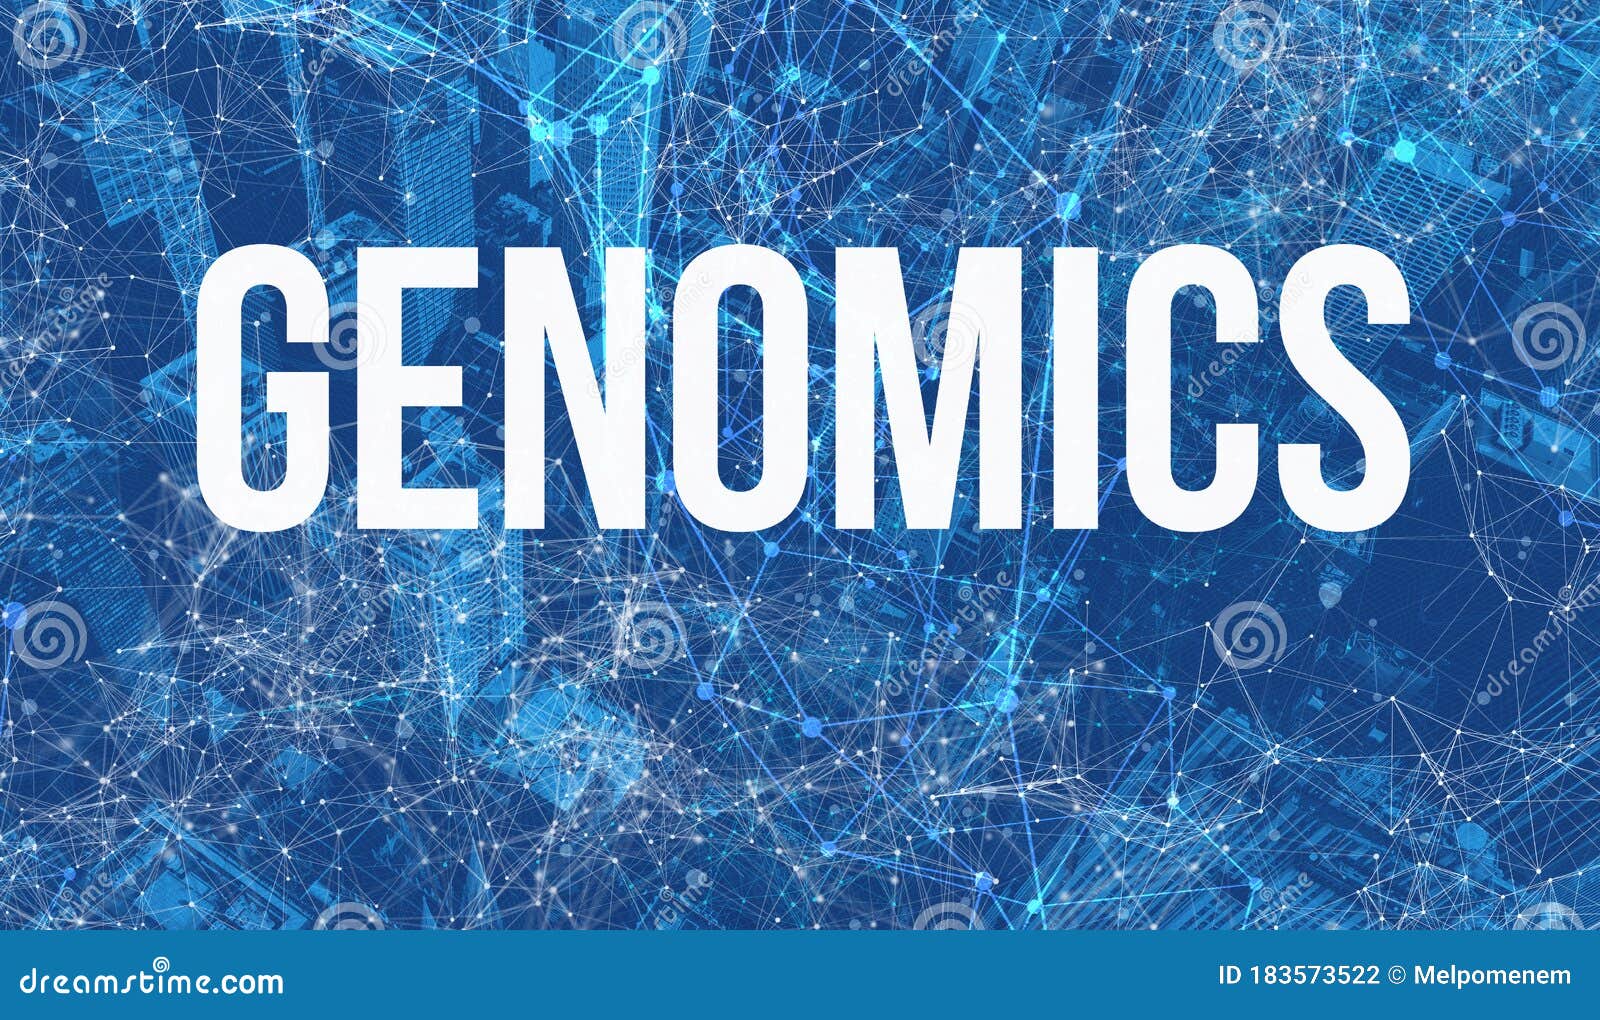 genomics theme with abstract cityscape